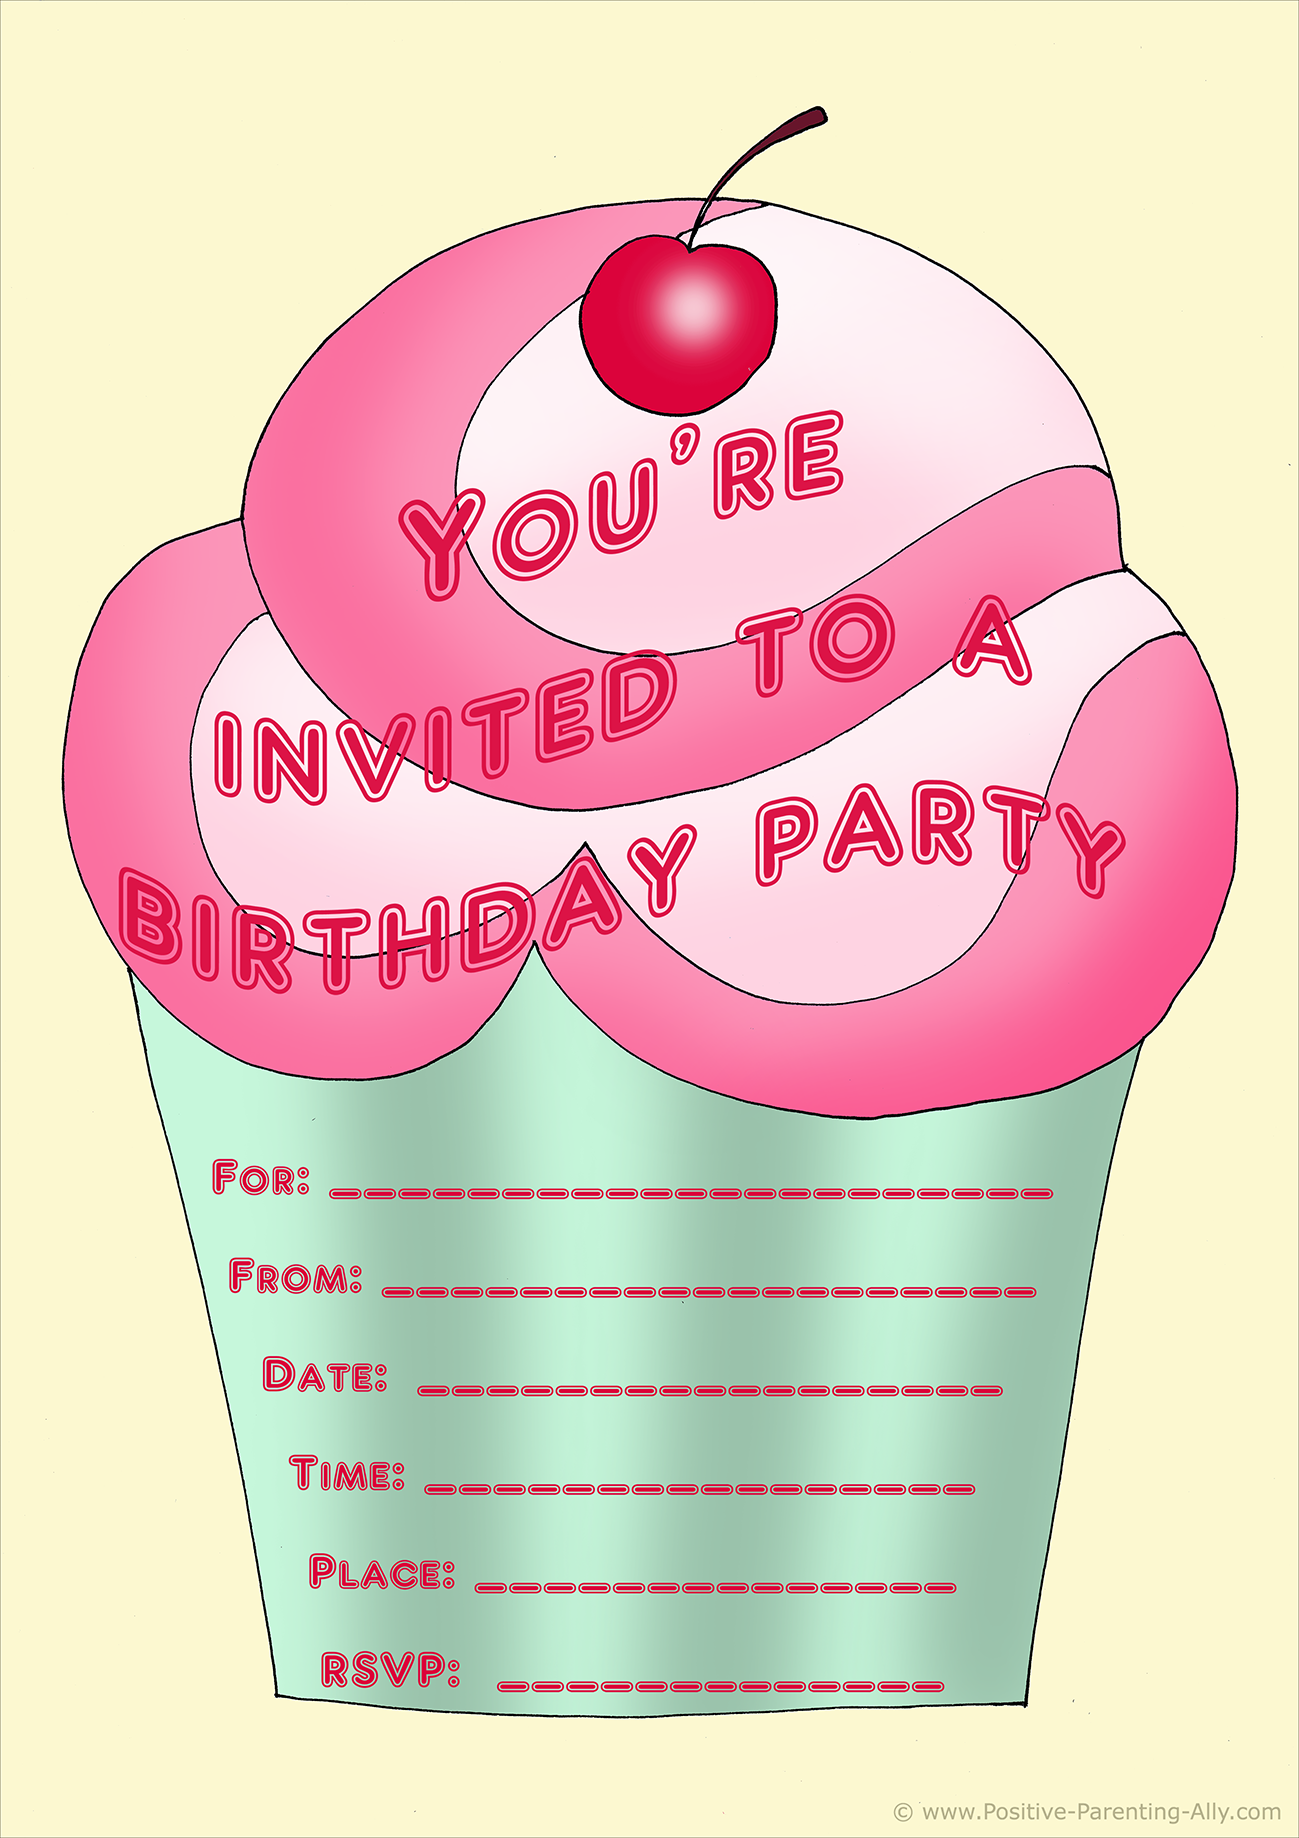 Free Birthday Party Invites For Kids In High Print Quality - Free Printable Birthday Invitations With Pictures